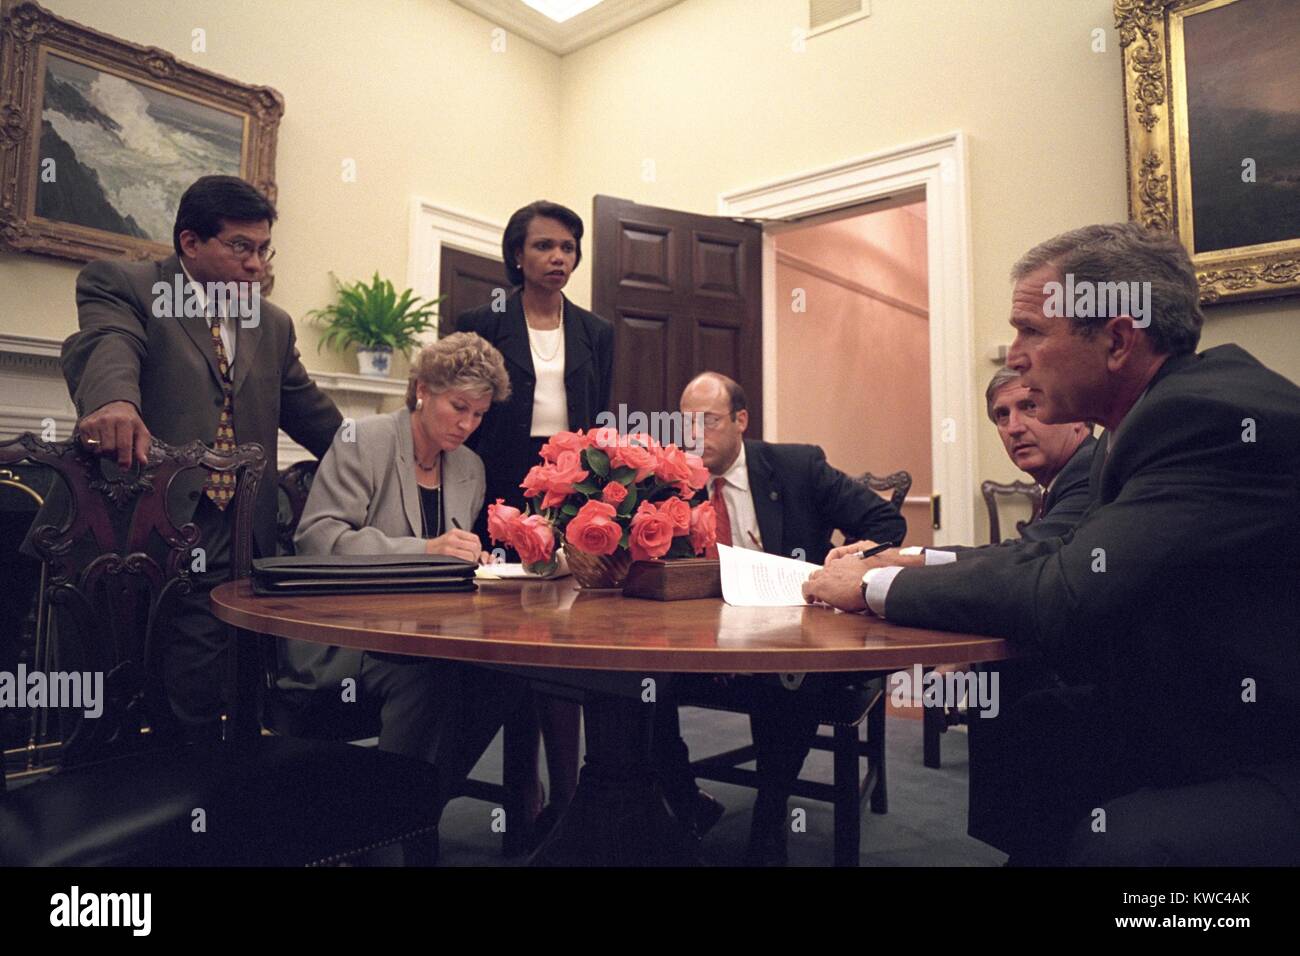 Oval Office meeting on the evening of Sept. 11, 2001, after 9-11 Terrorist Attacks. President George W. Bush is with his senior staff working on the speech that he will deliver at 8:30 PM. Left-Right: Alberto Gonzales, White House Counsel; Karen Hughes, Counselor; Condoleezza Rice, National Security Adviser; Ari Fleischer, Press Secretary, and Andy Card, Chief of Staff. (BSLOC 2015 2 138) Stock Photo